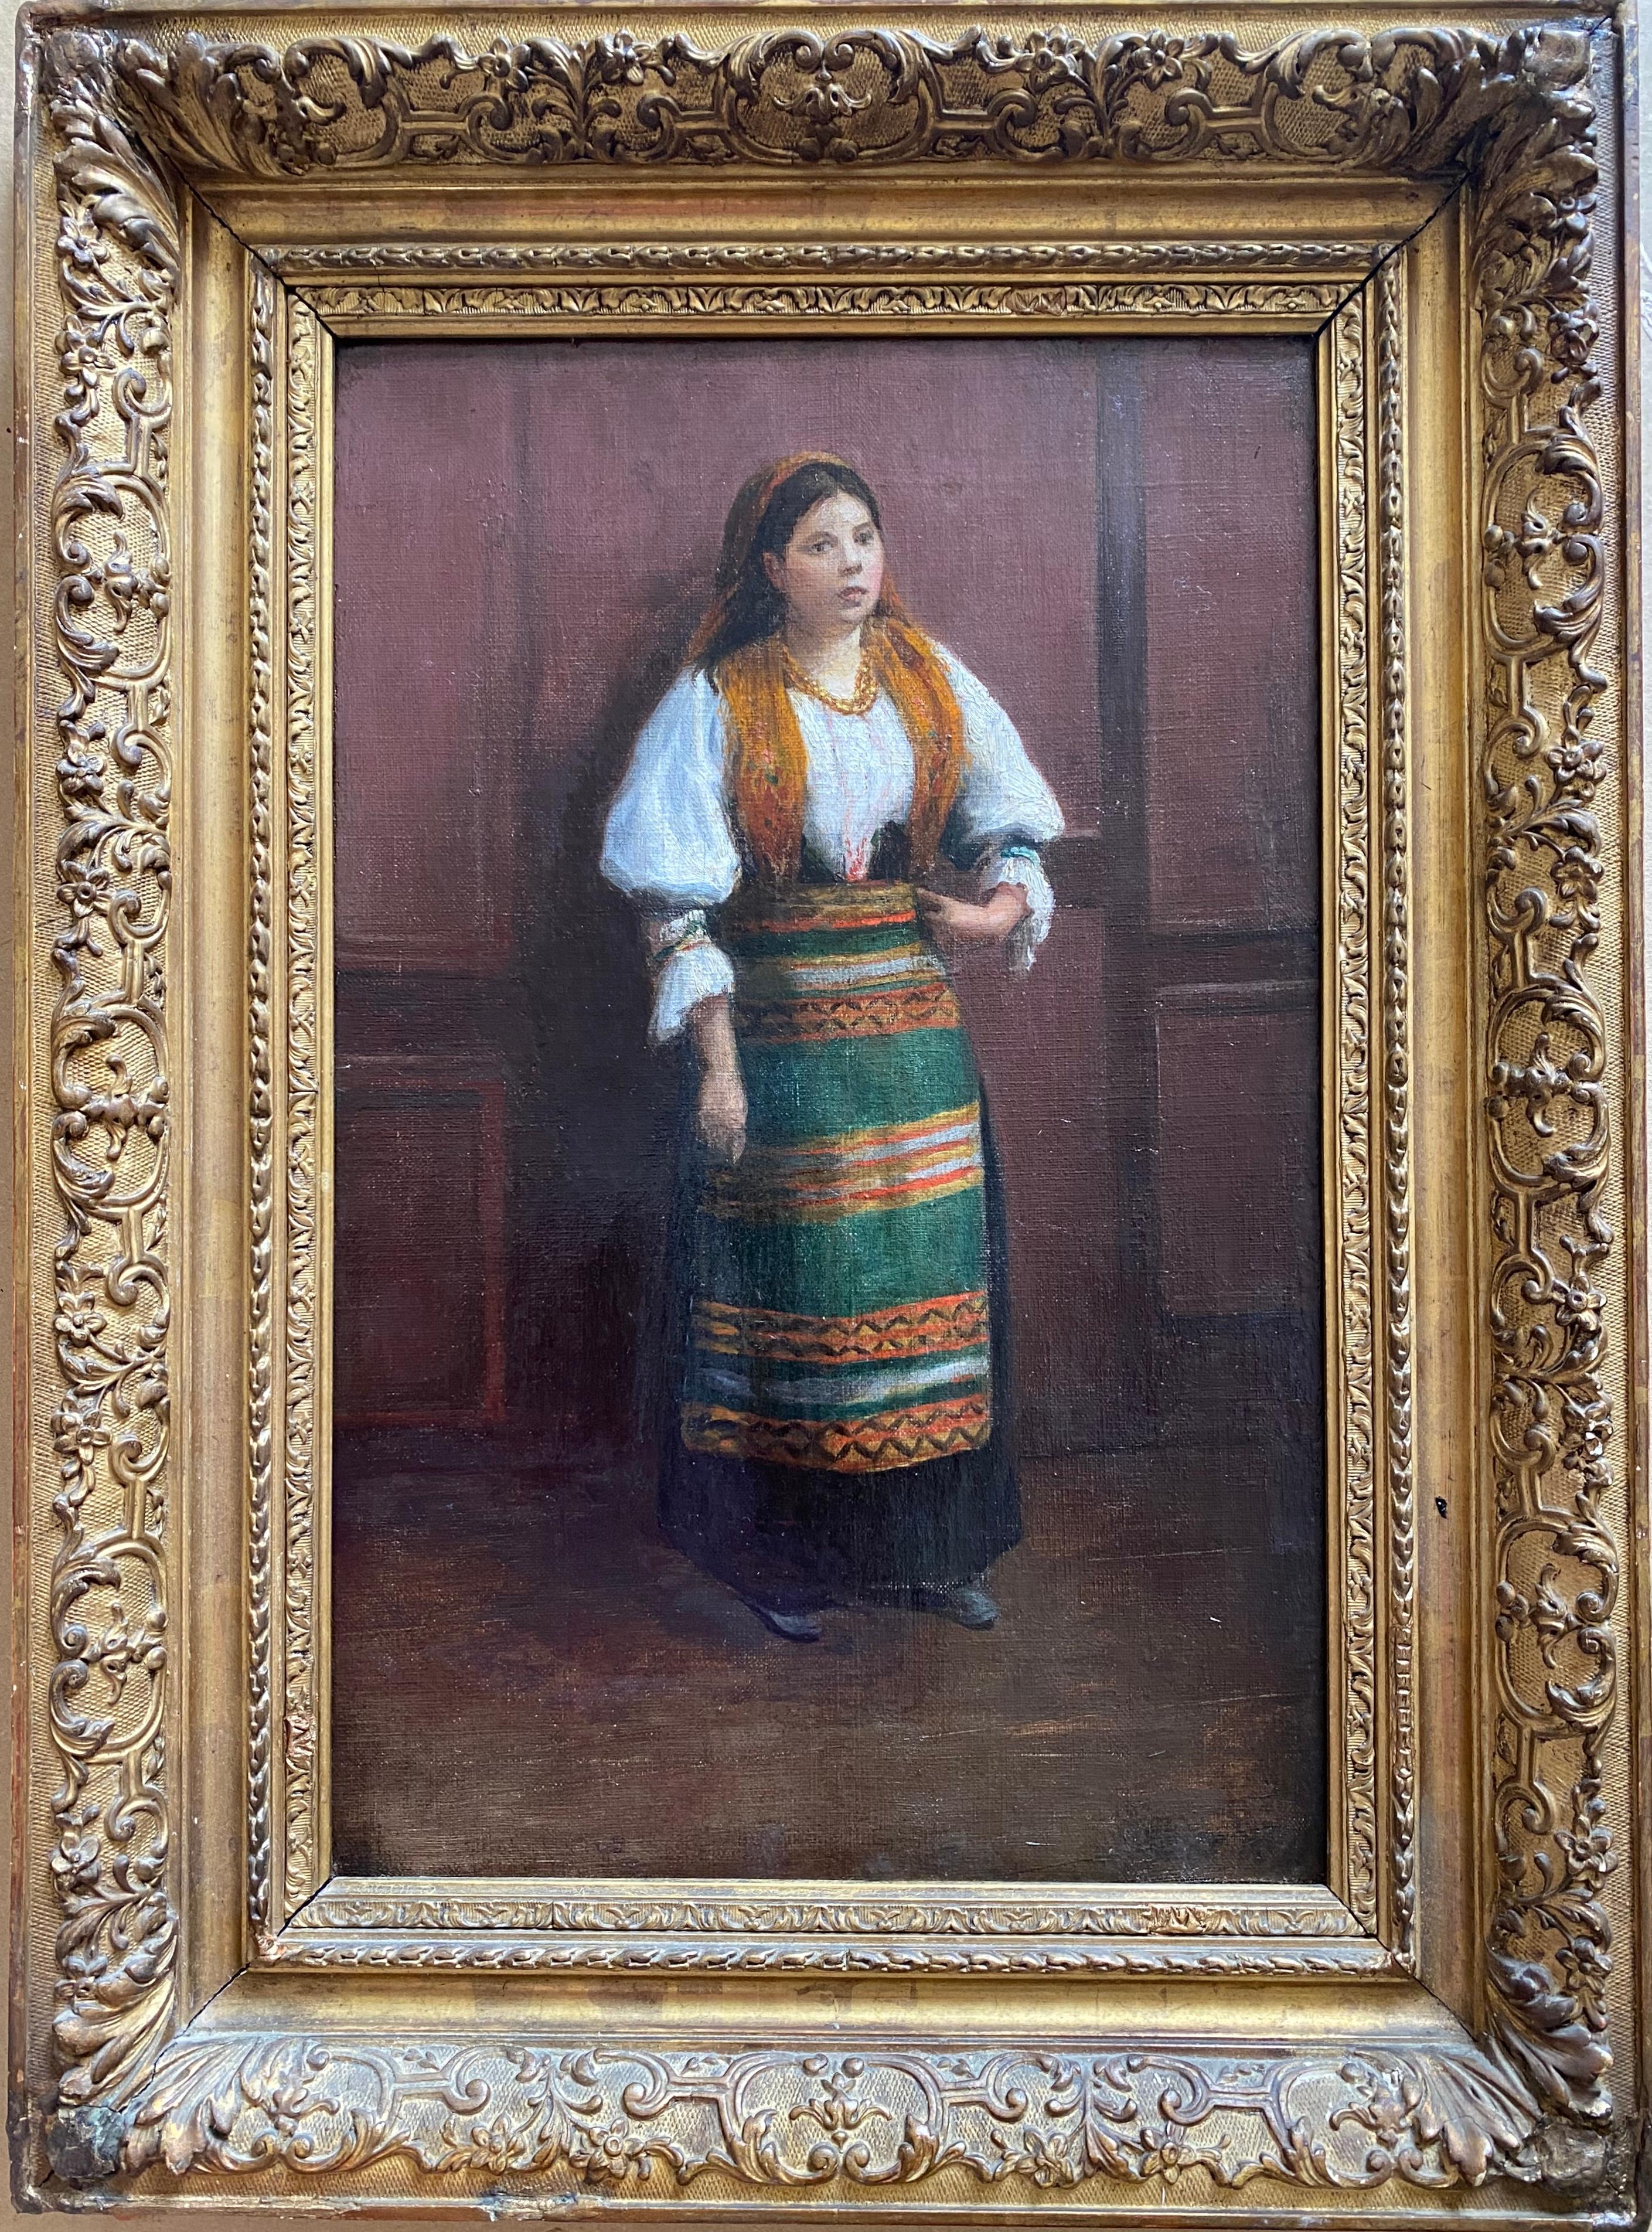 Portrait Painting Unknown - The first time model: the enigmatic young bohemian girl in traditional dress  